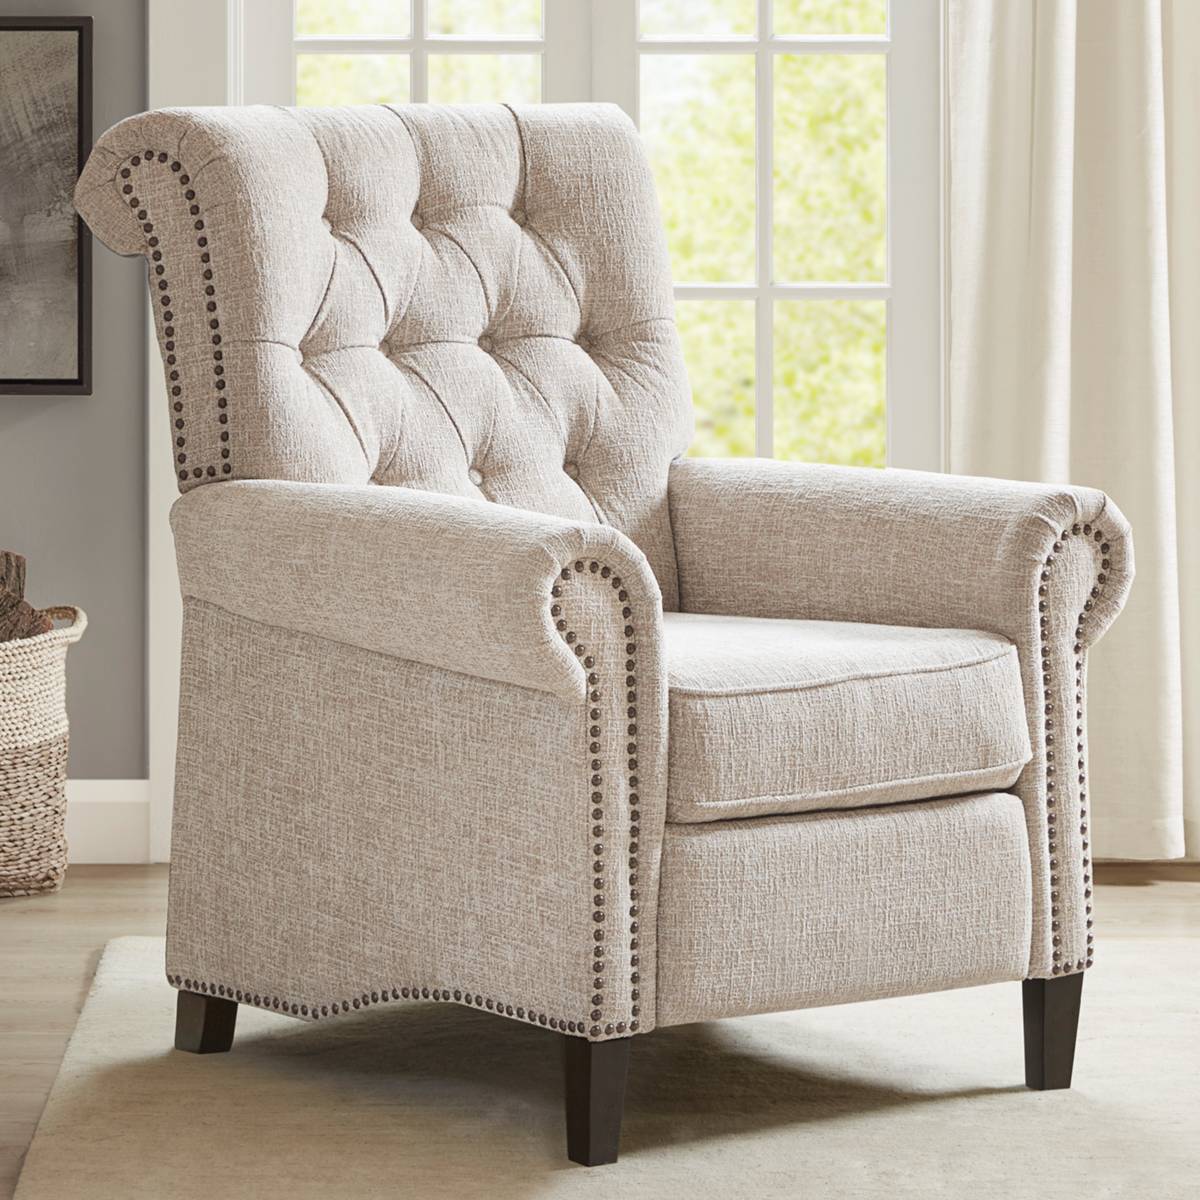 Quinley Fabric Pushback Recliner